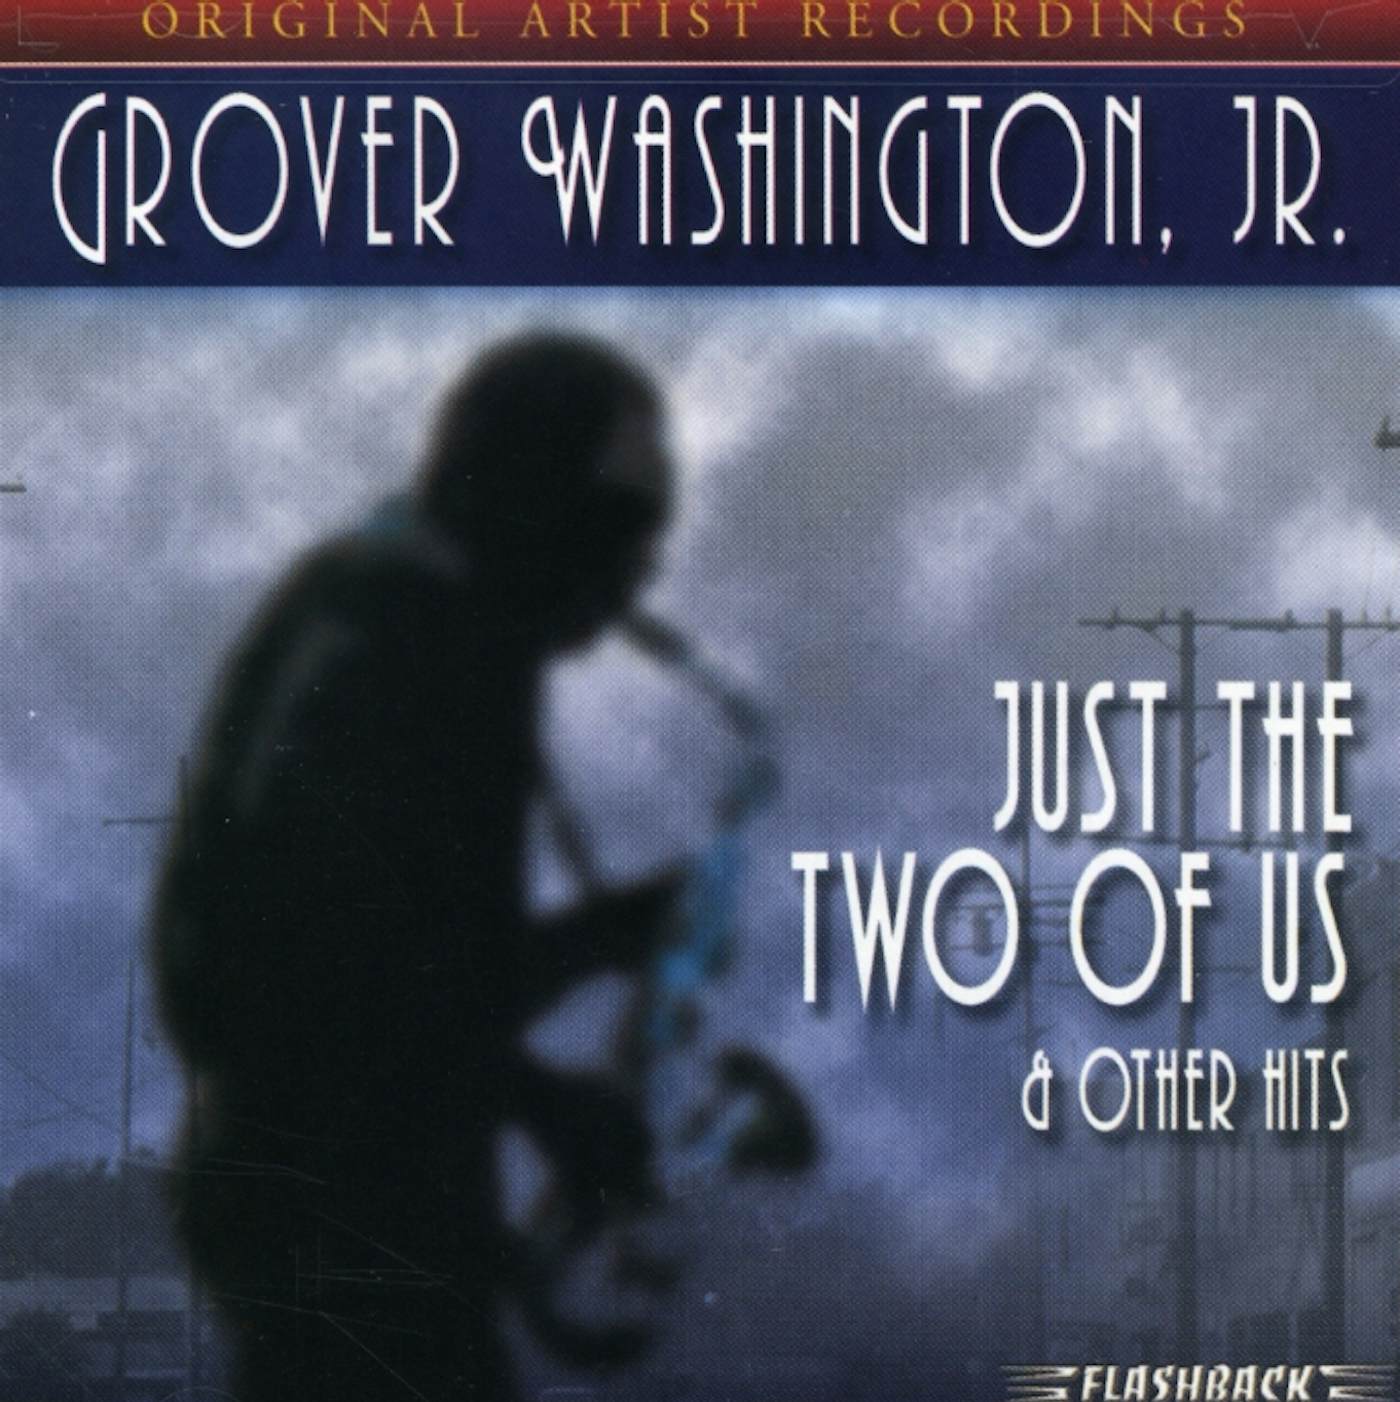 JUST THE TWO OF US - Grover Washington Jr. 